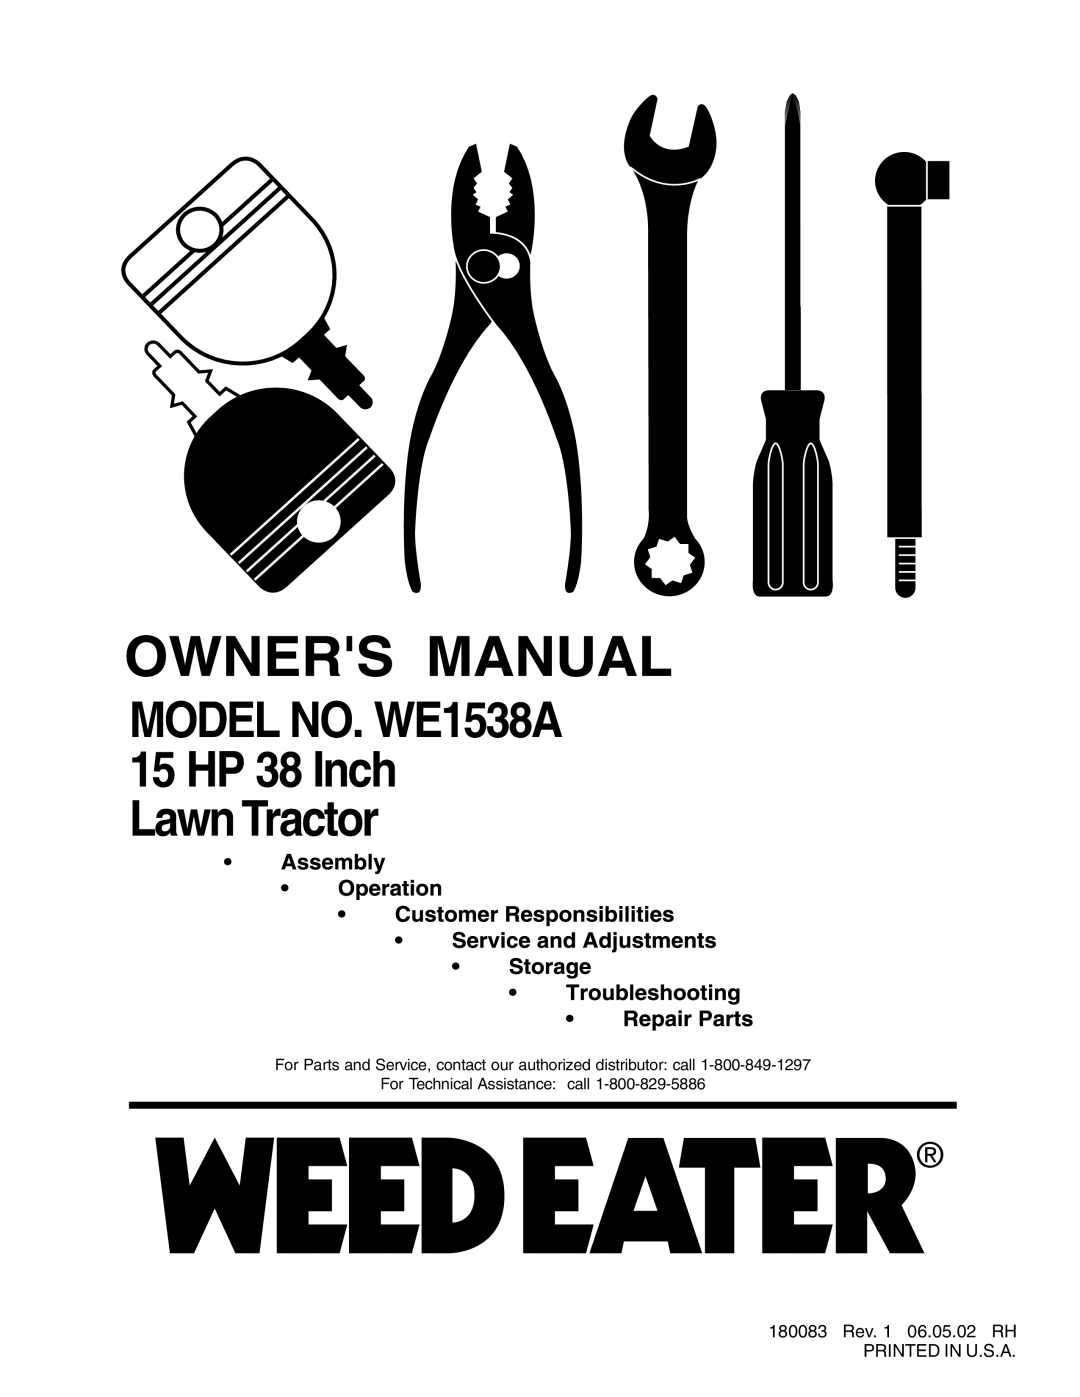 Weed Eater manual MODEL NO. WE1538A 15 HP 38 Inch Lawn Tractor 